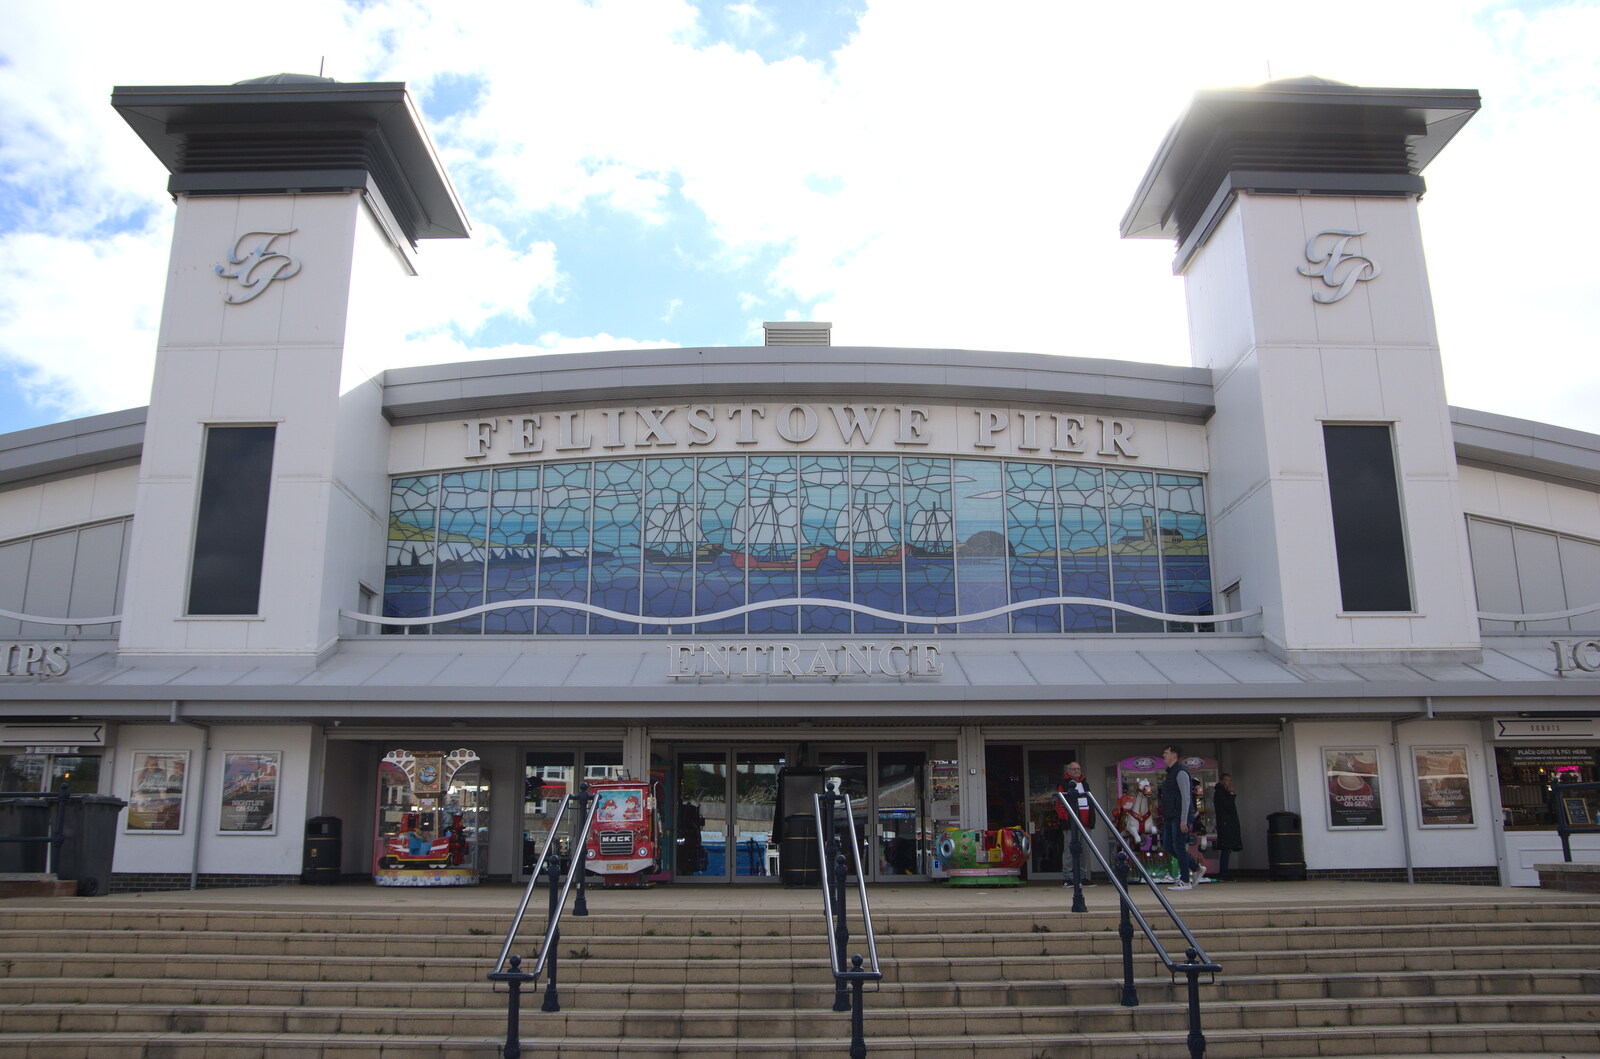 A Postcard from Felixstowe, Suffolk - 5th October 2022: The grand frontage of Felixstowe Pier